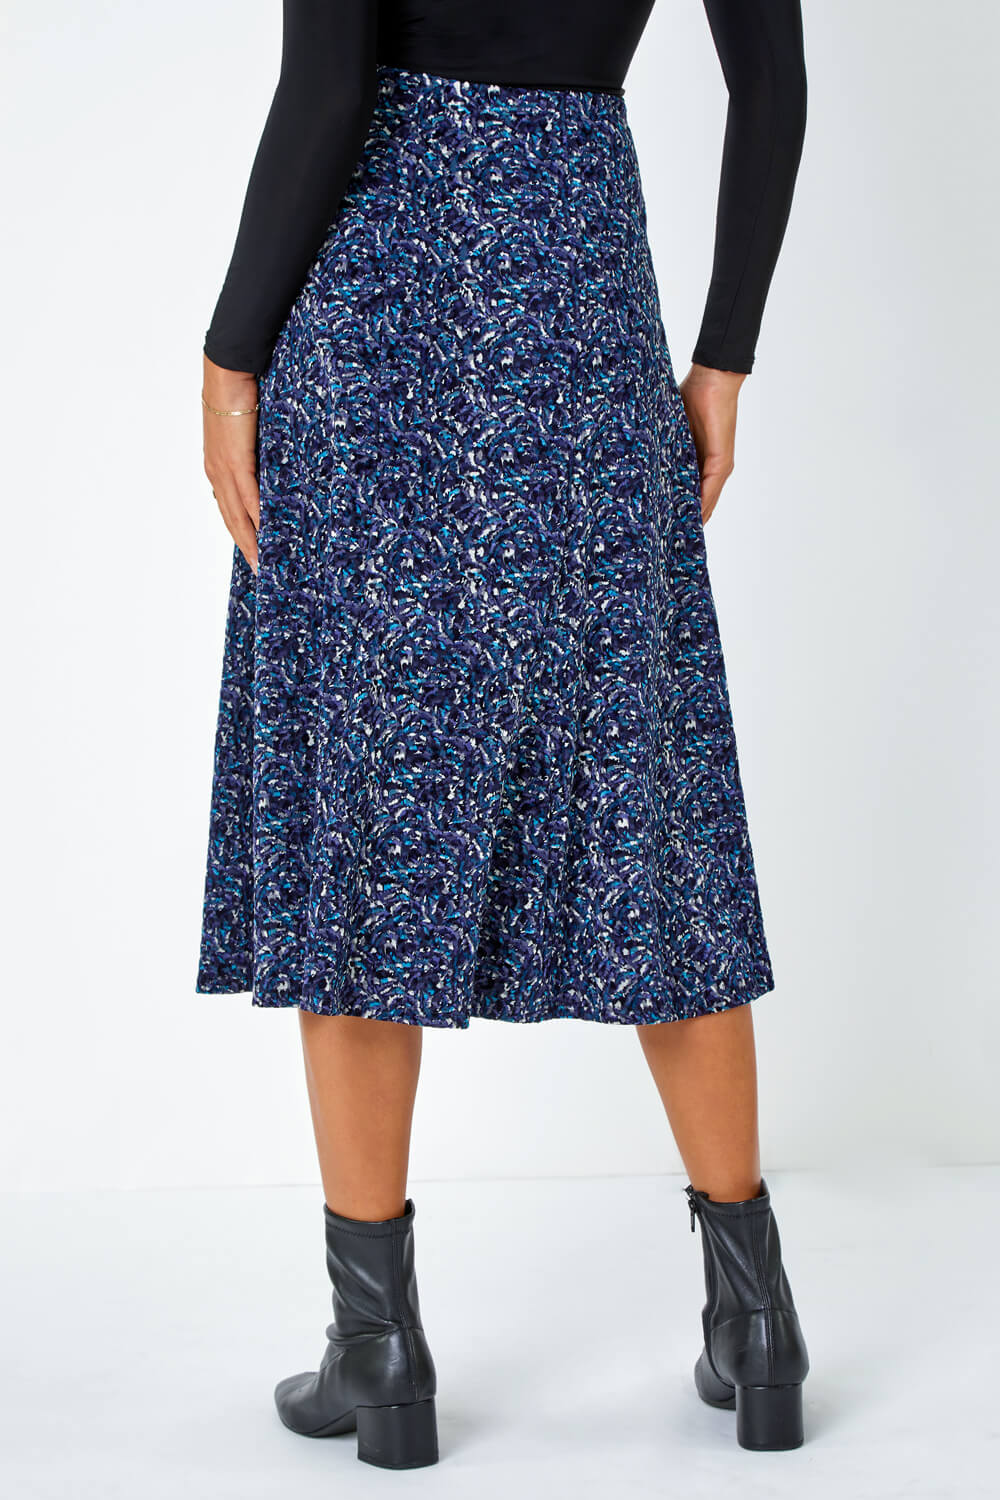 Midnight Blue Textured Abstract Print A-Line Stretch Skirt, Image 3 of 5